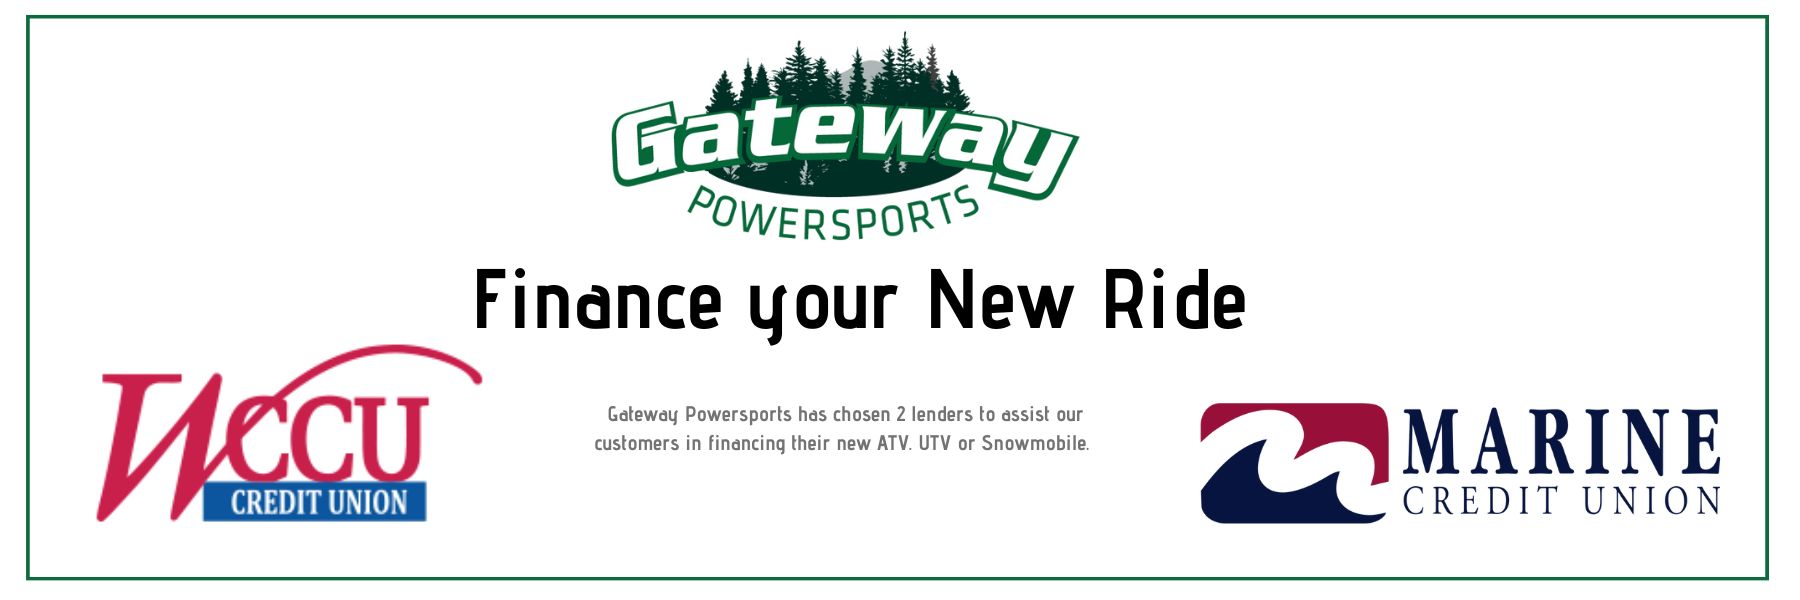 Financing for Gateway Powersports